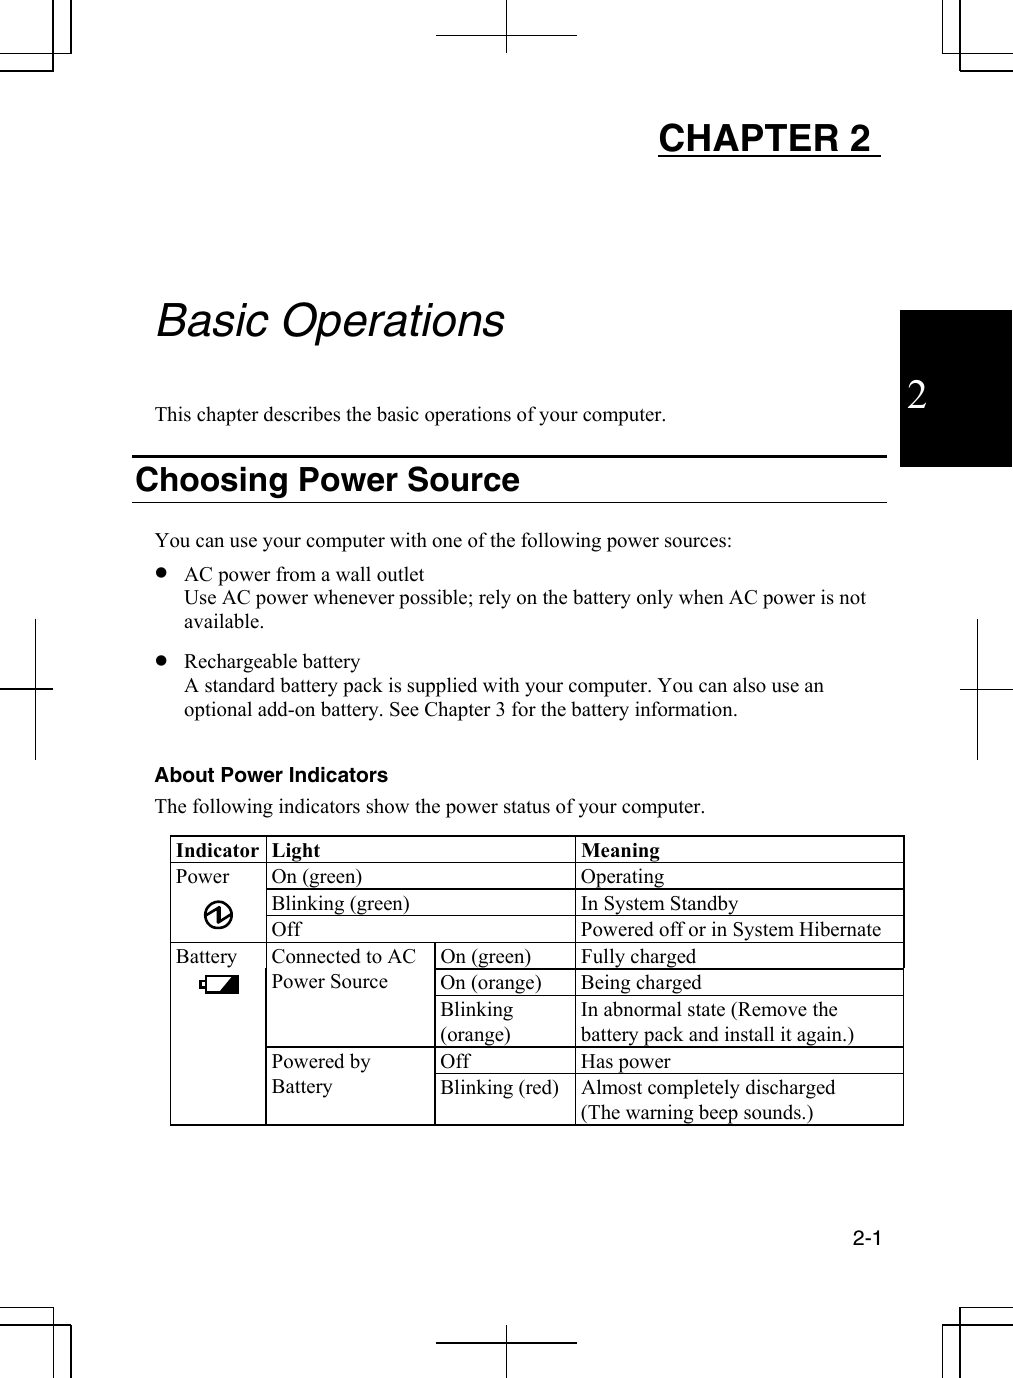  2-1  2 CHAPTER 2      Basic Operations  This chapter describes the basic operations of your computer.  Choosing Power Source  You can use your computer with one of the following power sources: •  AC power from a wall outlet Use AC power whenever possible; rely on the battery only when AC power is not available. •  Rechargeable battery  A standard battery pack is supplied with your computer. You can also use an optional add-on battery. See Chapter 3 for the battery information.   About Power Indicators The following indicators show the power status of your computer.  Indicator Light  Meaning Power On (green)  Operating Blinking (green)  In System Standby  Off  Powered off or in System Hibernate Battery   On (green)  Fully charged  On (orange)  Being charged  Connected to AC Power Source Blinking (orange) In abnormal state (Remove the battery pack and install it again.)   Off   Has power    Powered by Battery  Blinking (red)  Almost completely discharged (The warning beep sounds.)  